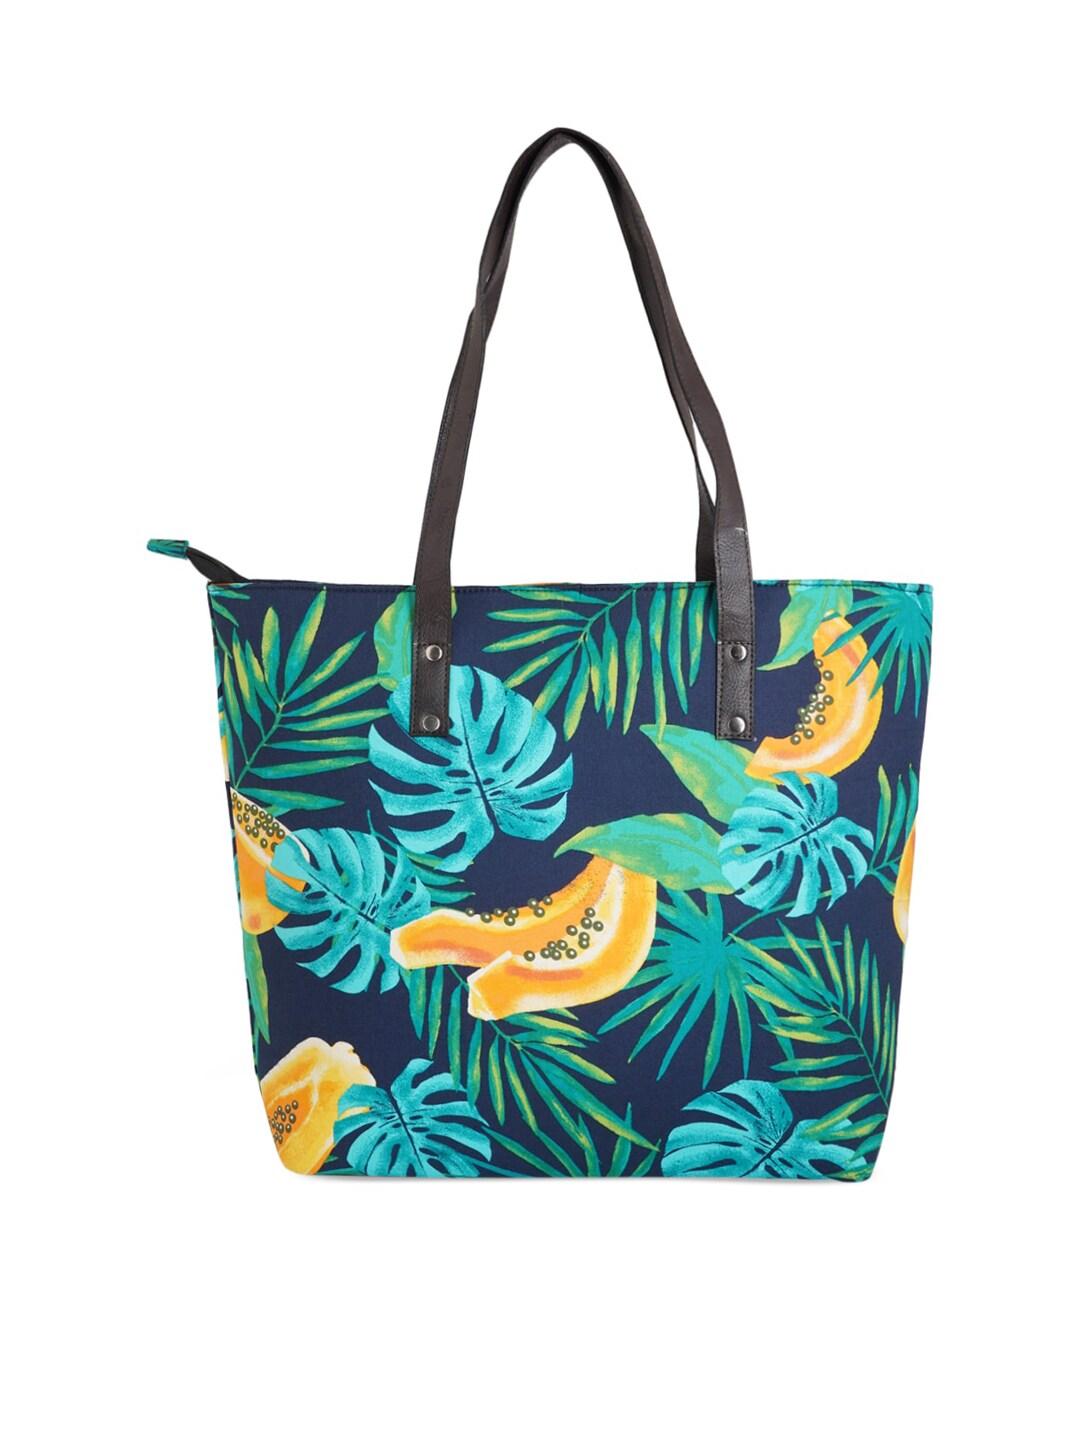 Style Shoes Navy Blue & Green Printed Structured Tote Bag with Tasselled